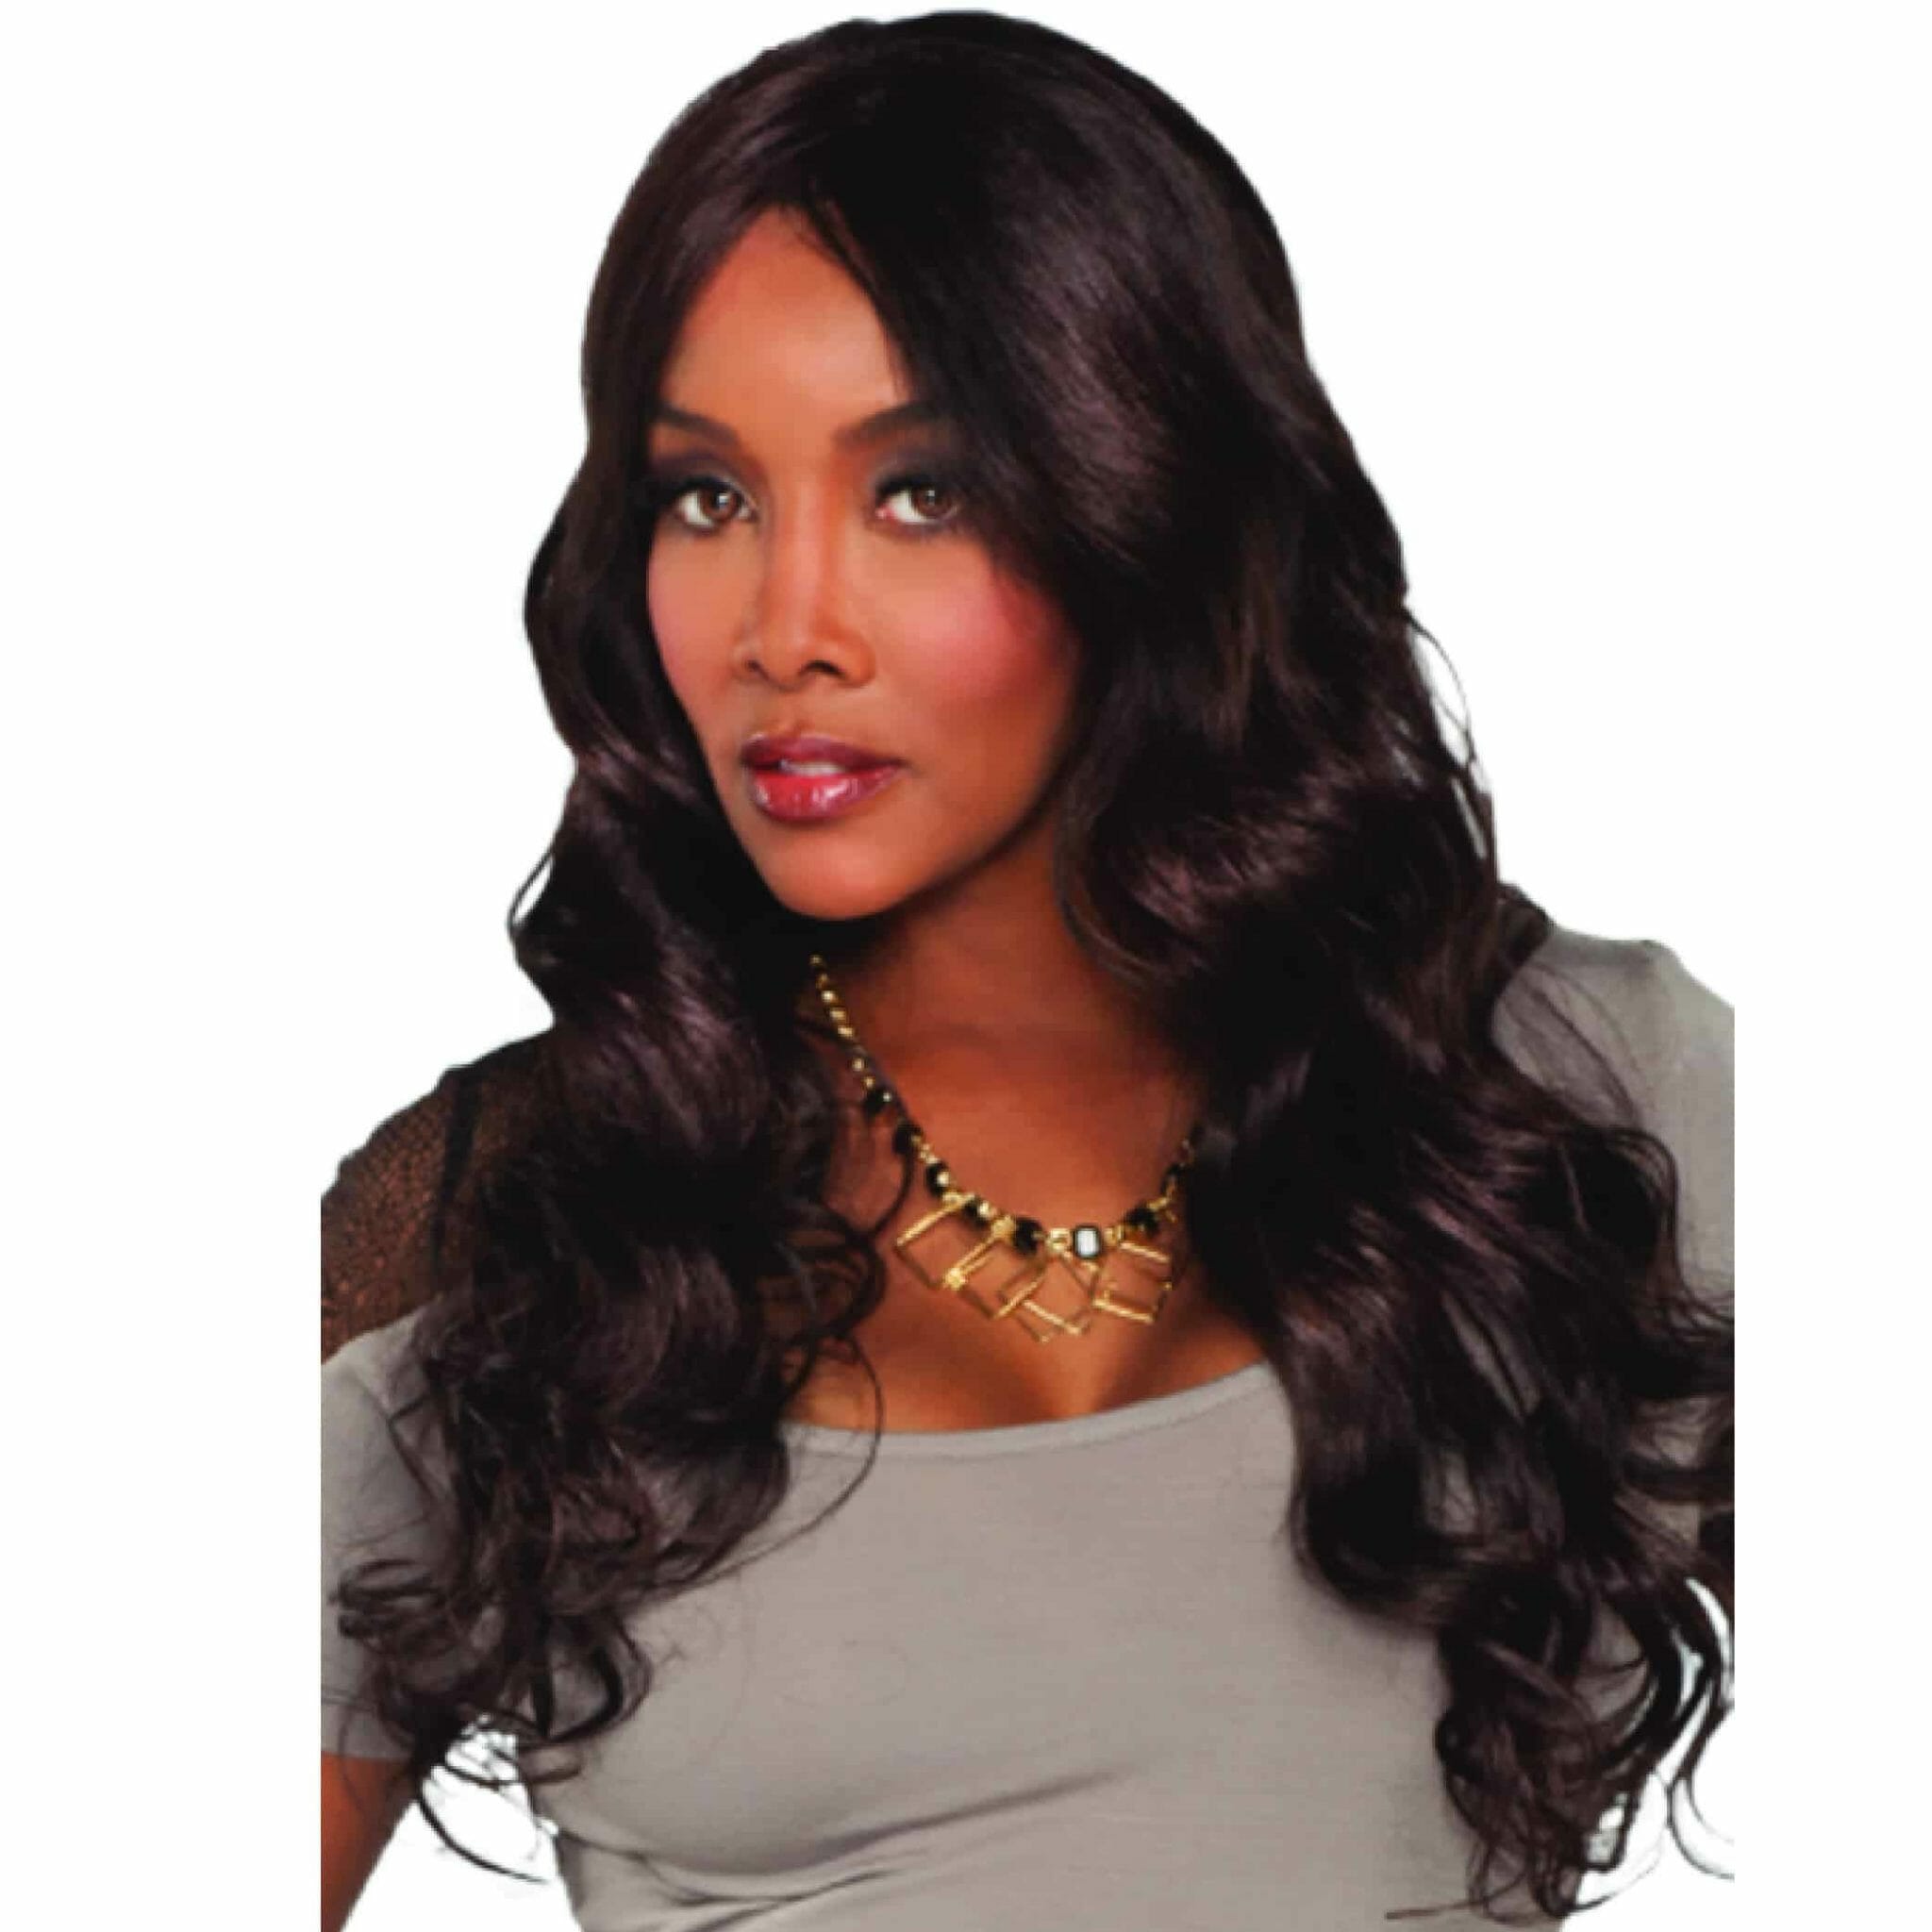 Vivica Fox wearing gray top, necklace, and a long, wavy off-black wig by Vivica A. Fox Wigs 